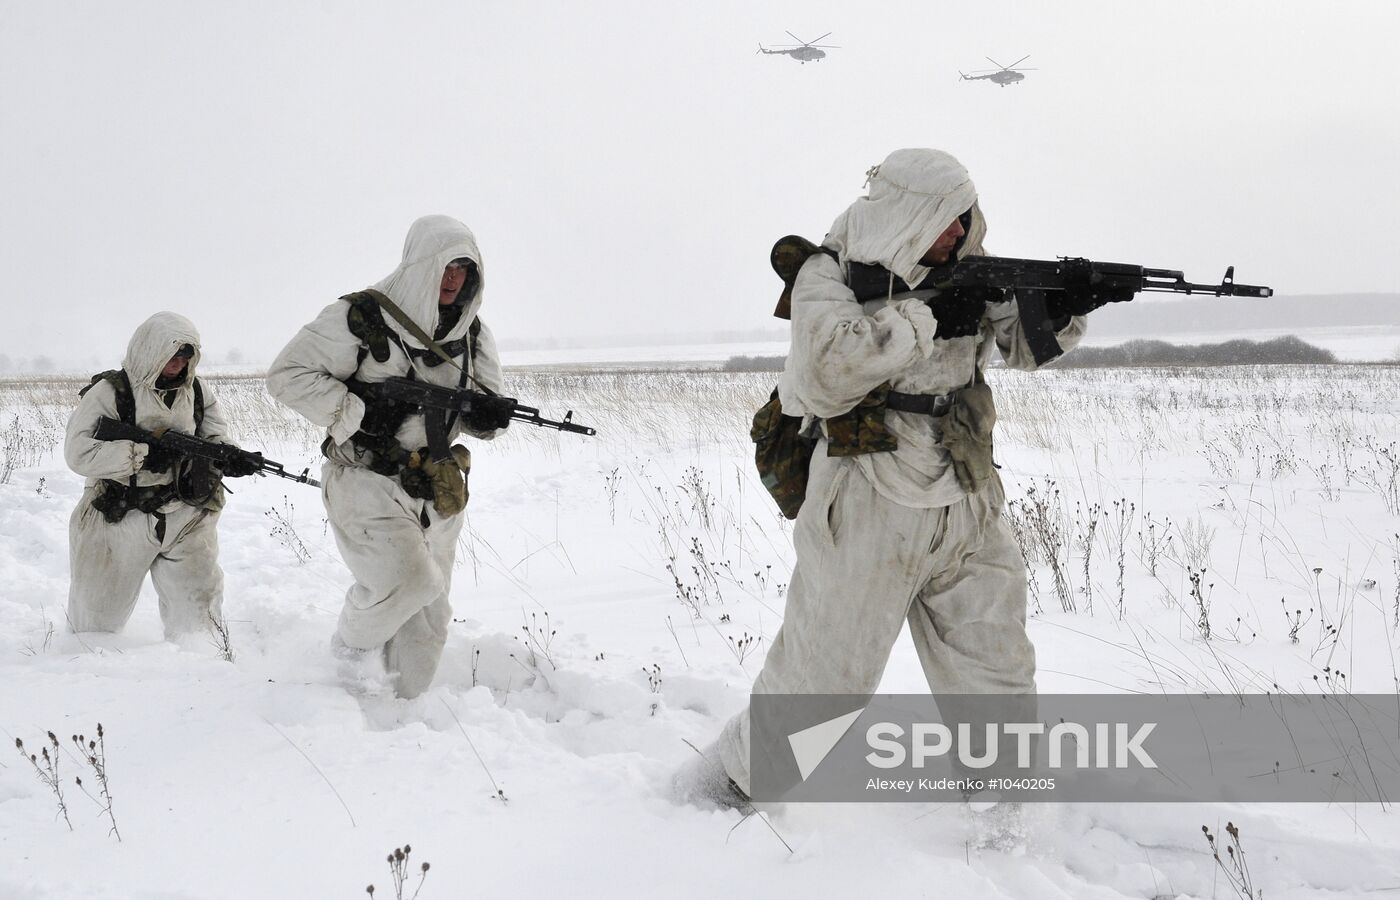 Exercises of 106th guards division paratroopers in Tula region